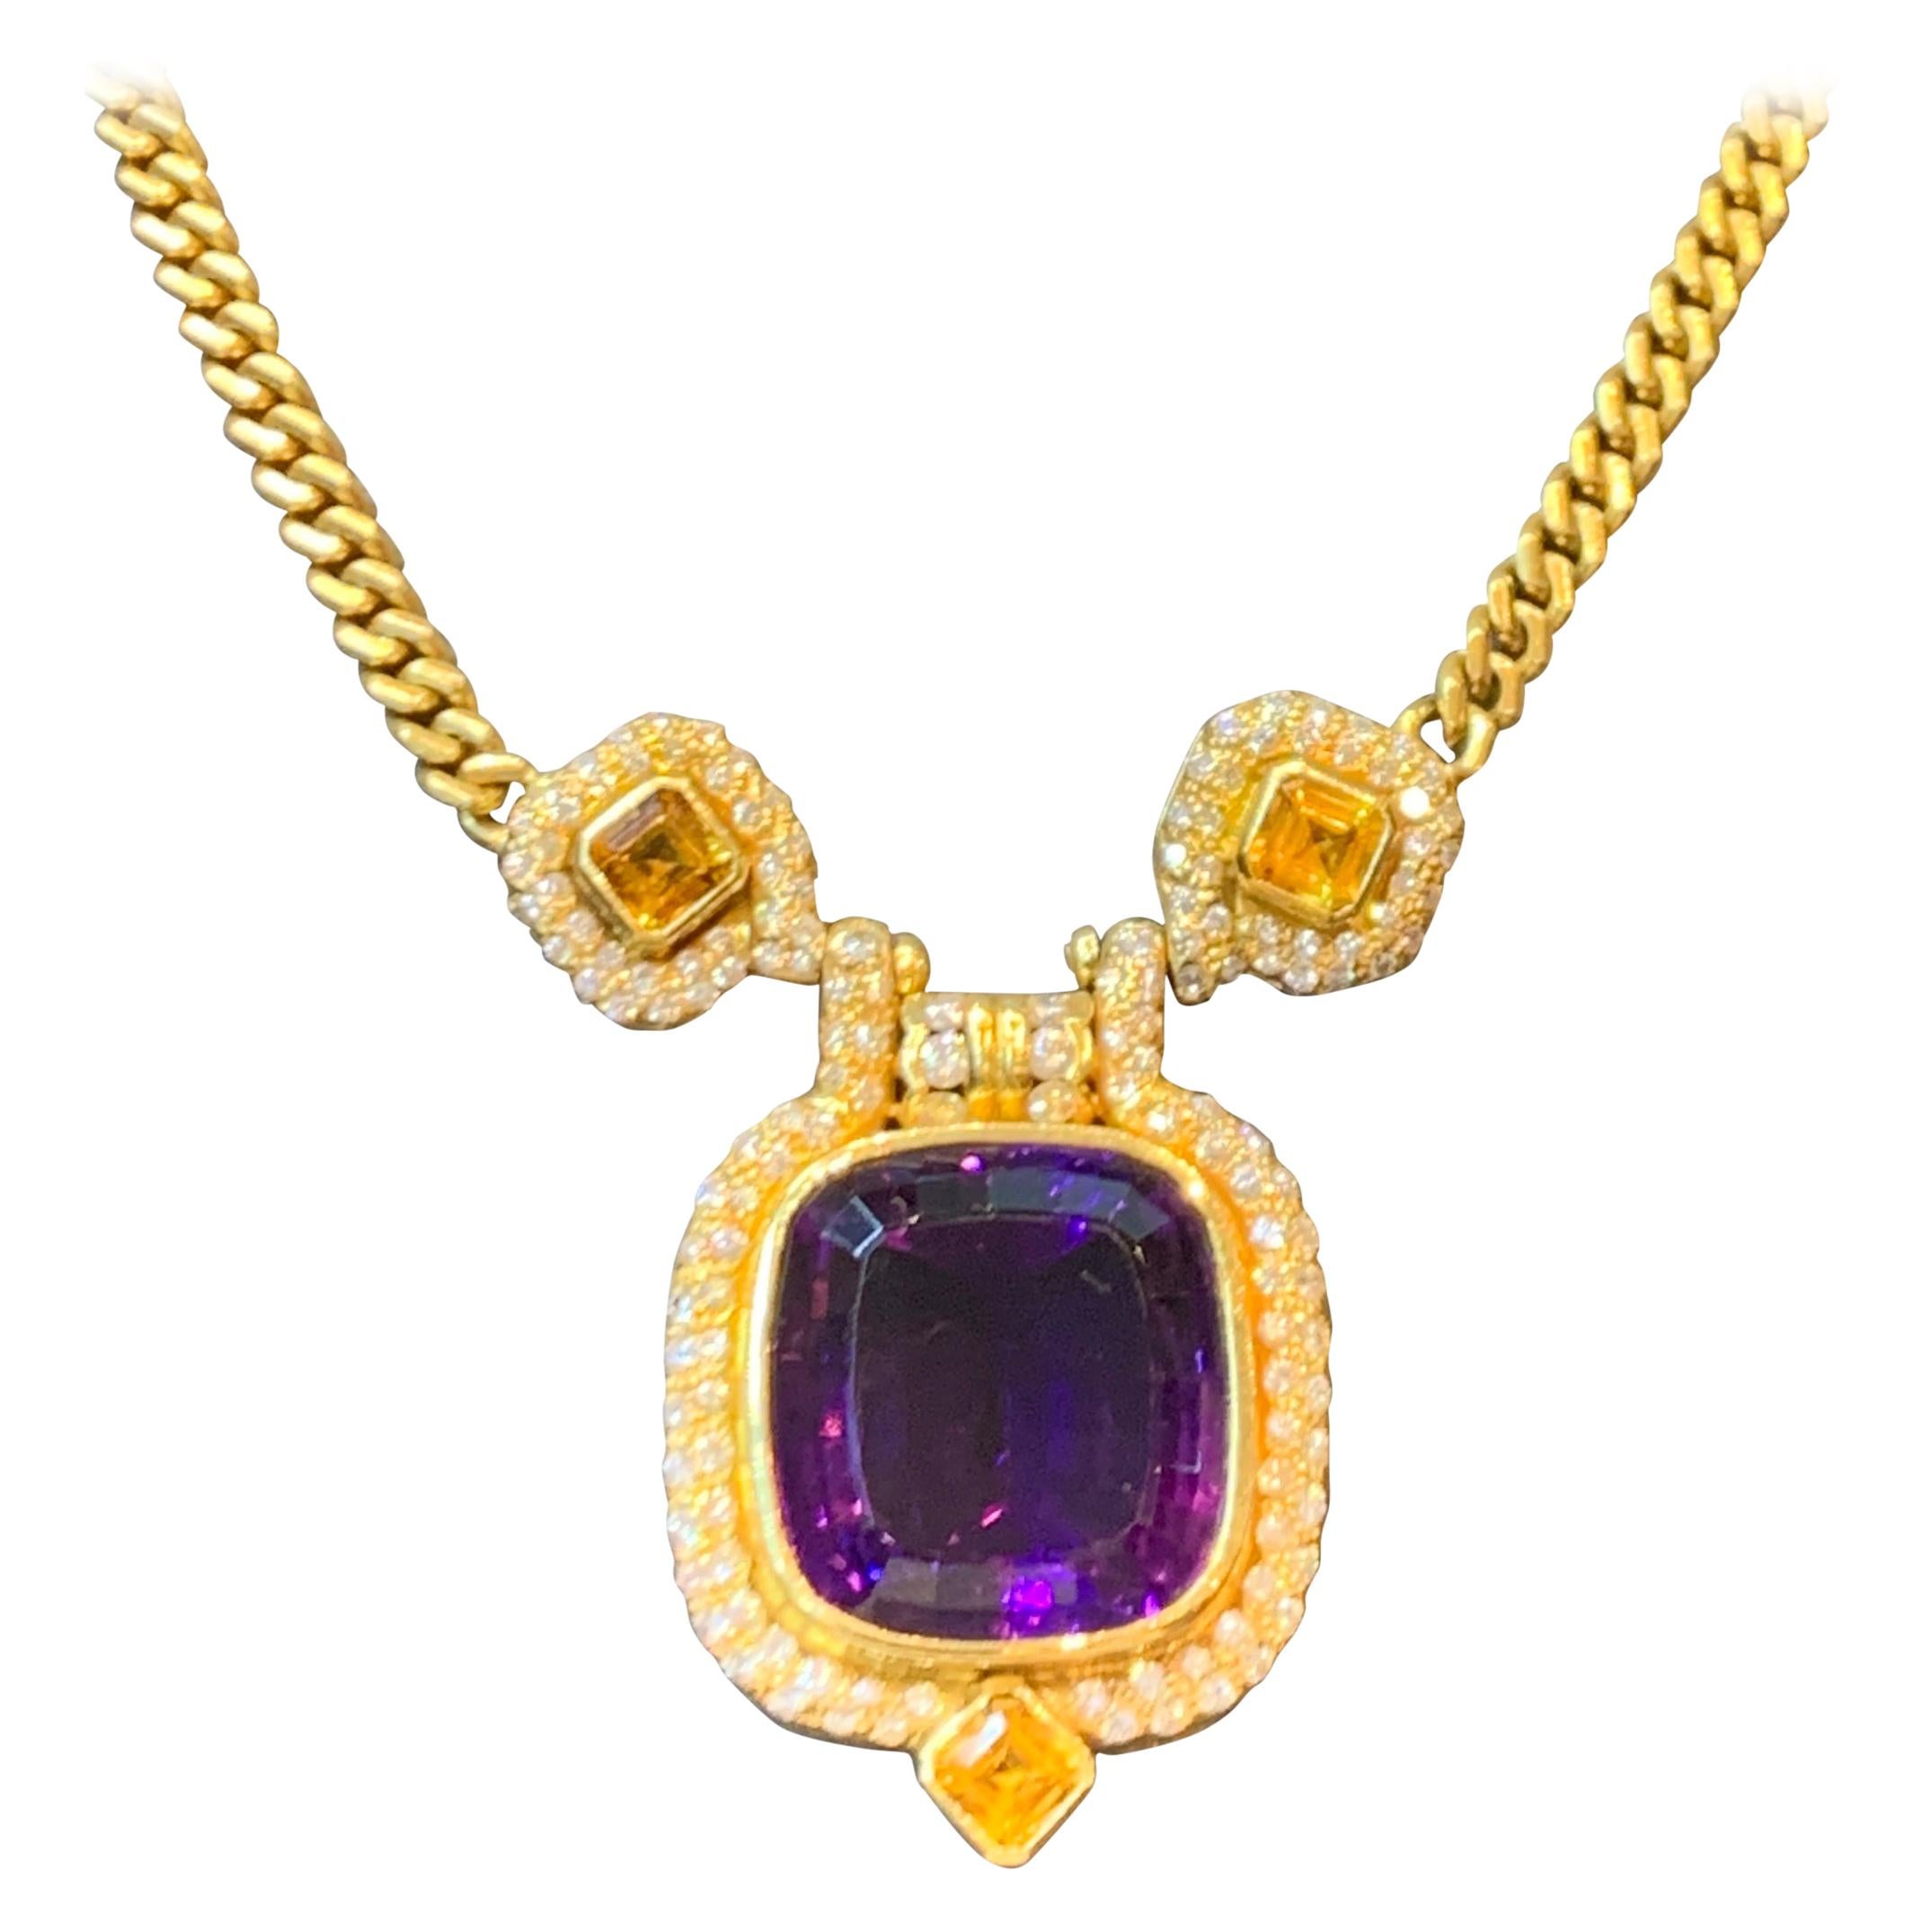 Men's Gold Amethyst and Diamond Necklace